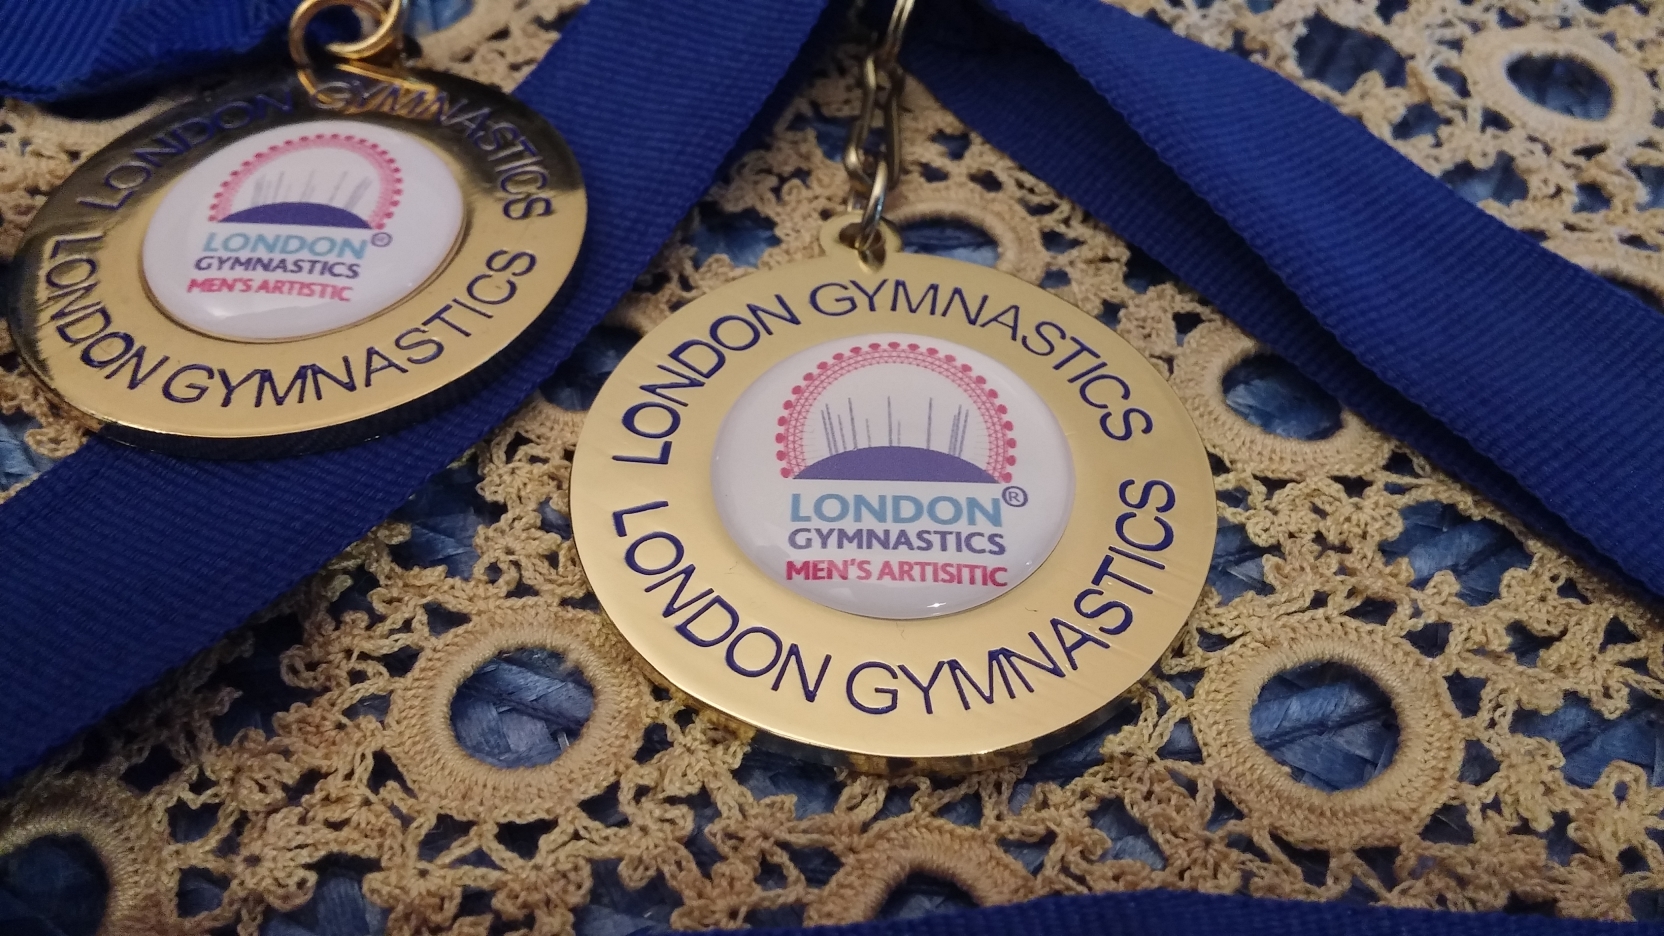 Here are the two Gold medals from the 2015 and 2016 london Regional Challenge